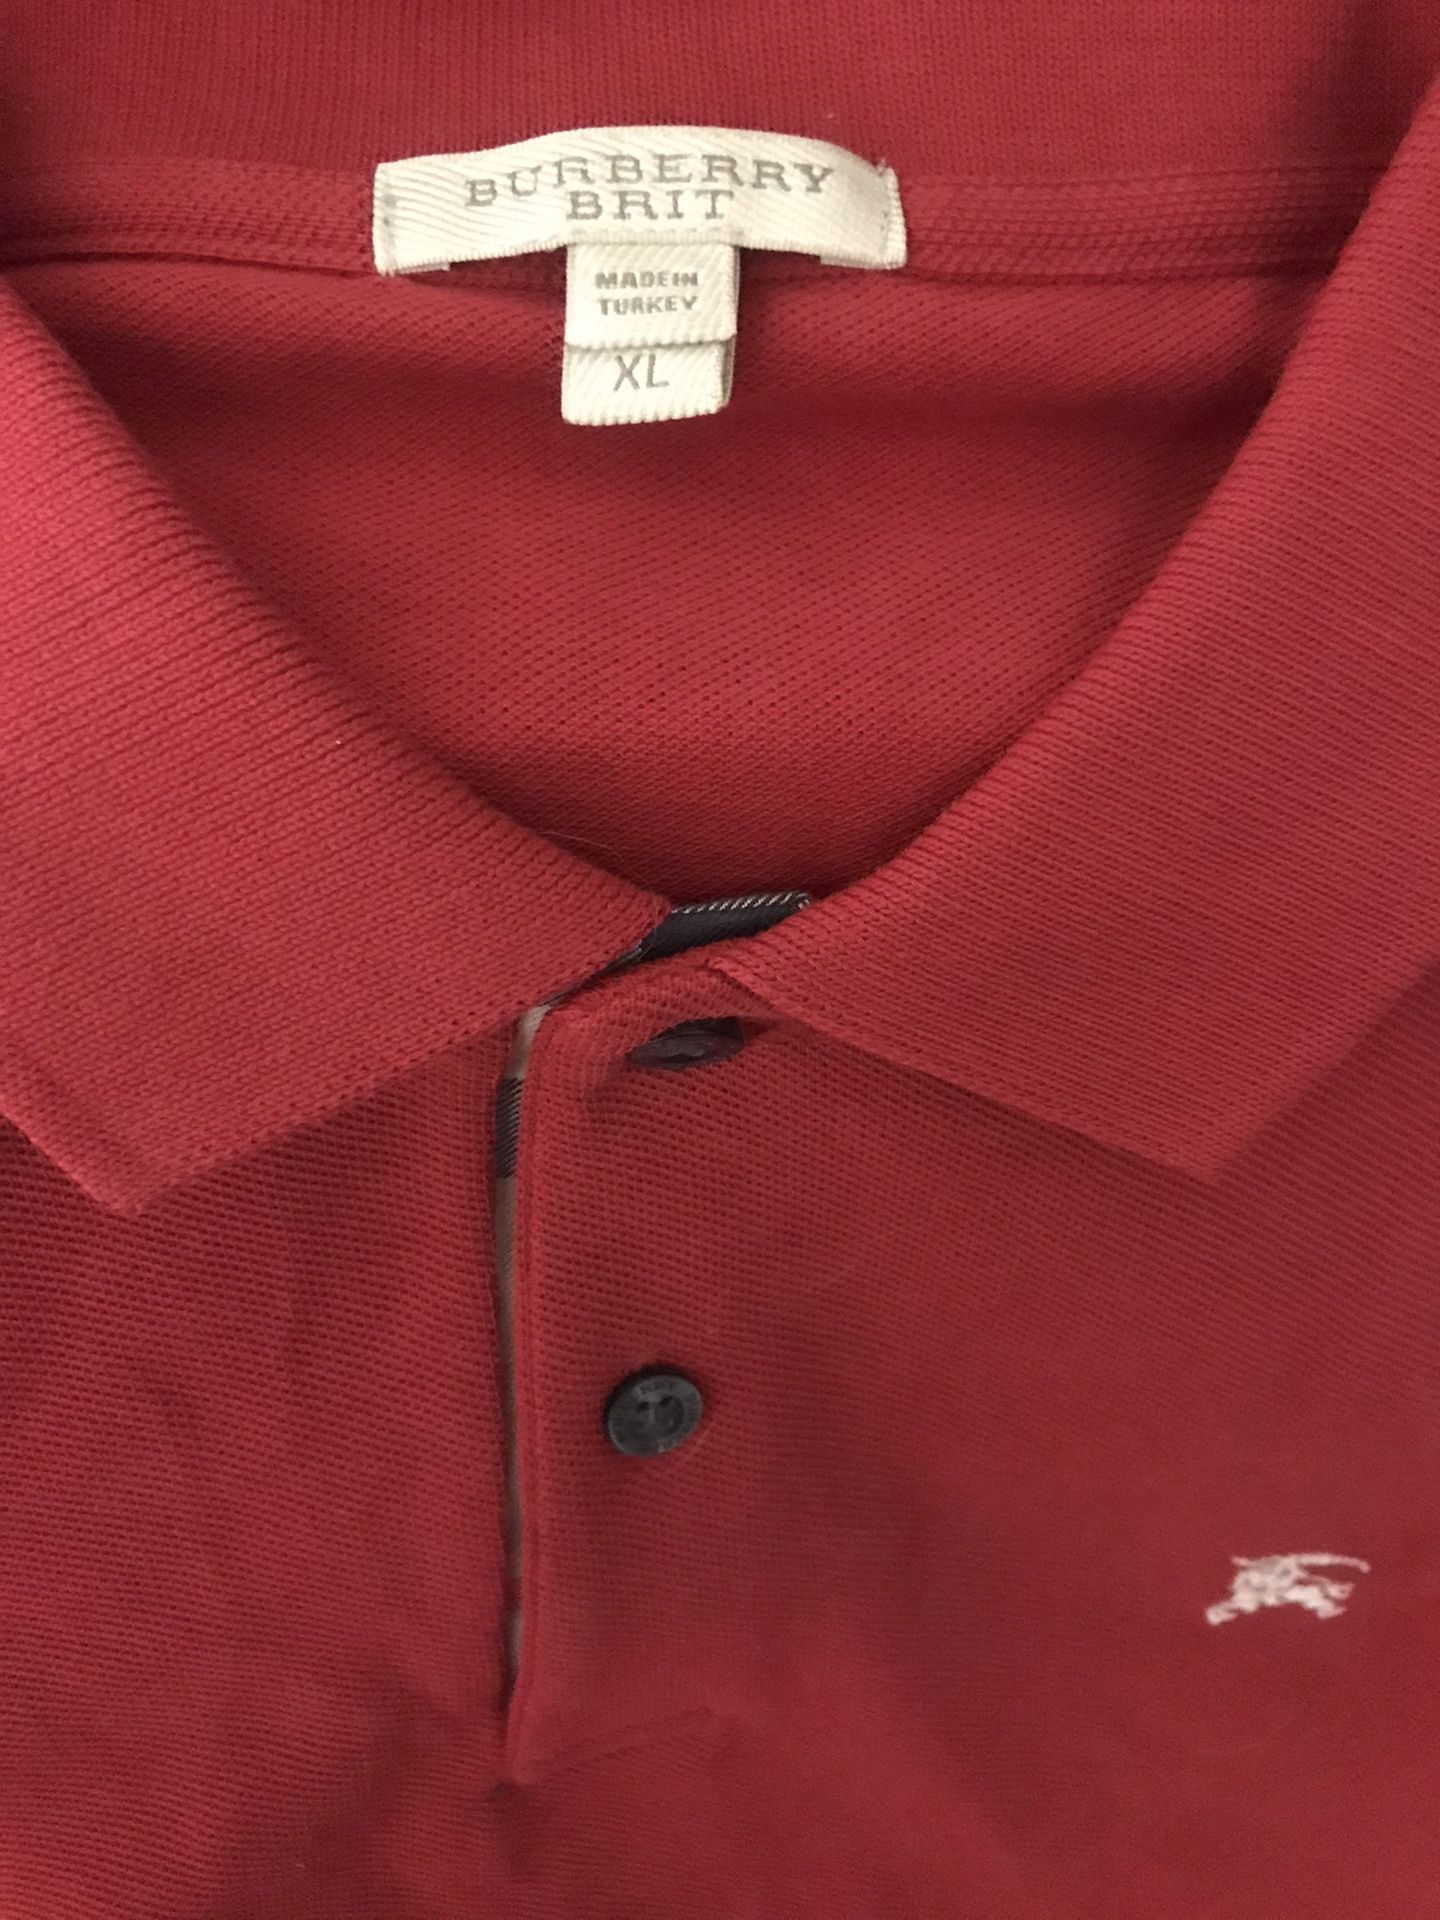 Authentic Red Burberry Brit Polo Shirt🌏